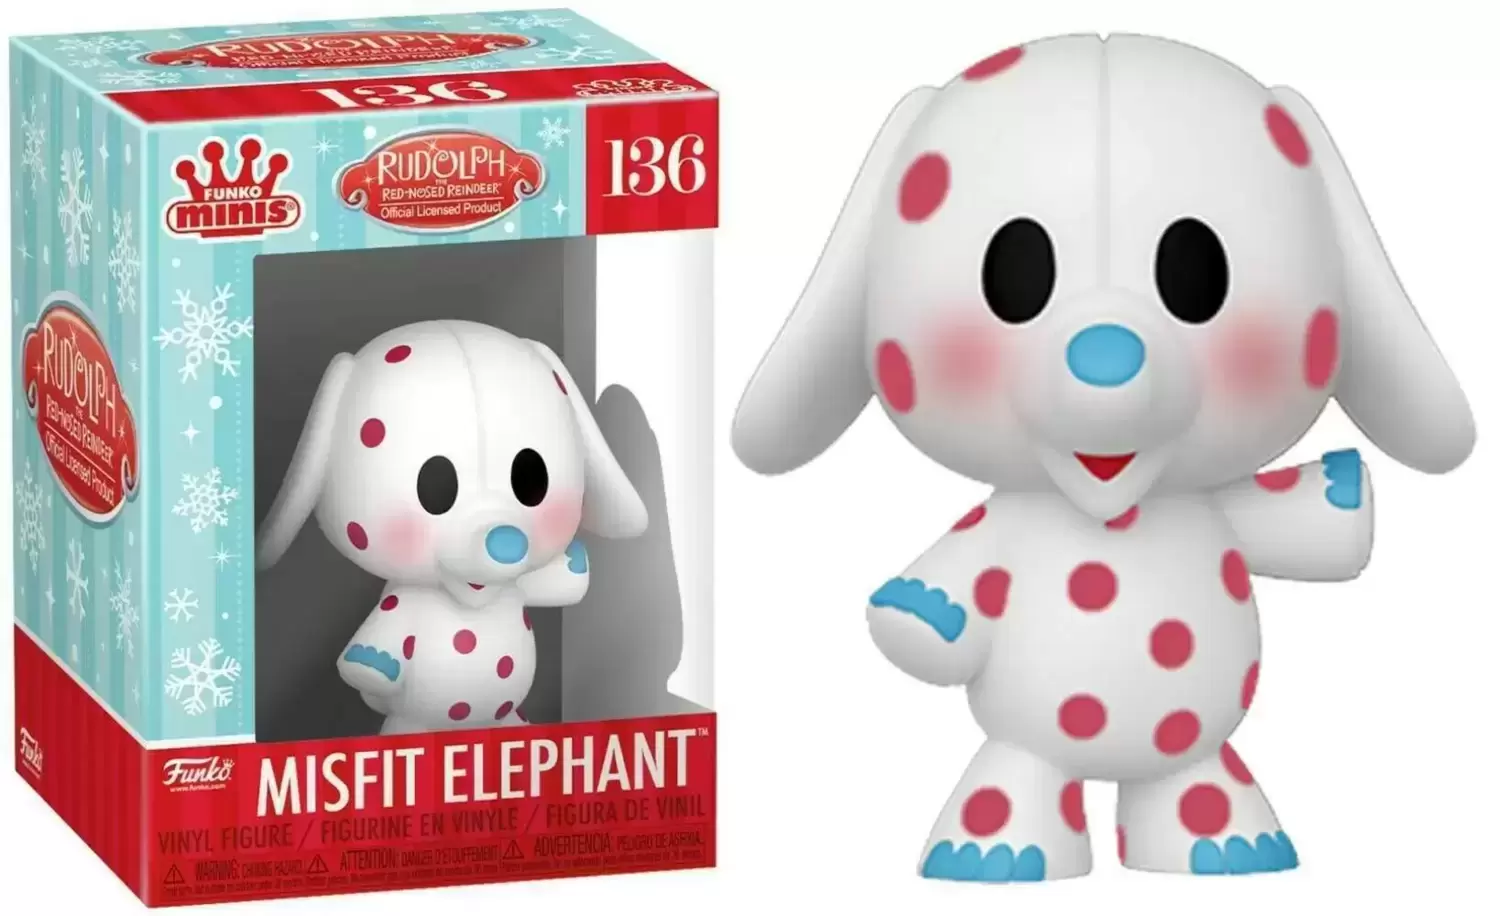 Funko Minis - Rudolph the Red-Nosed Reindeer - Misfit Elephant